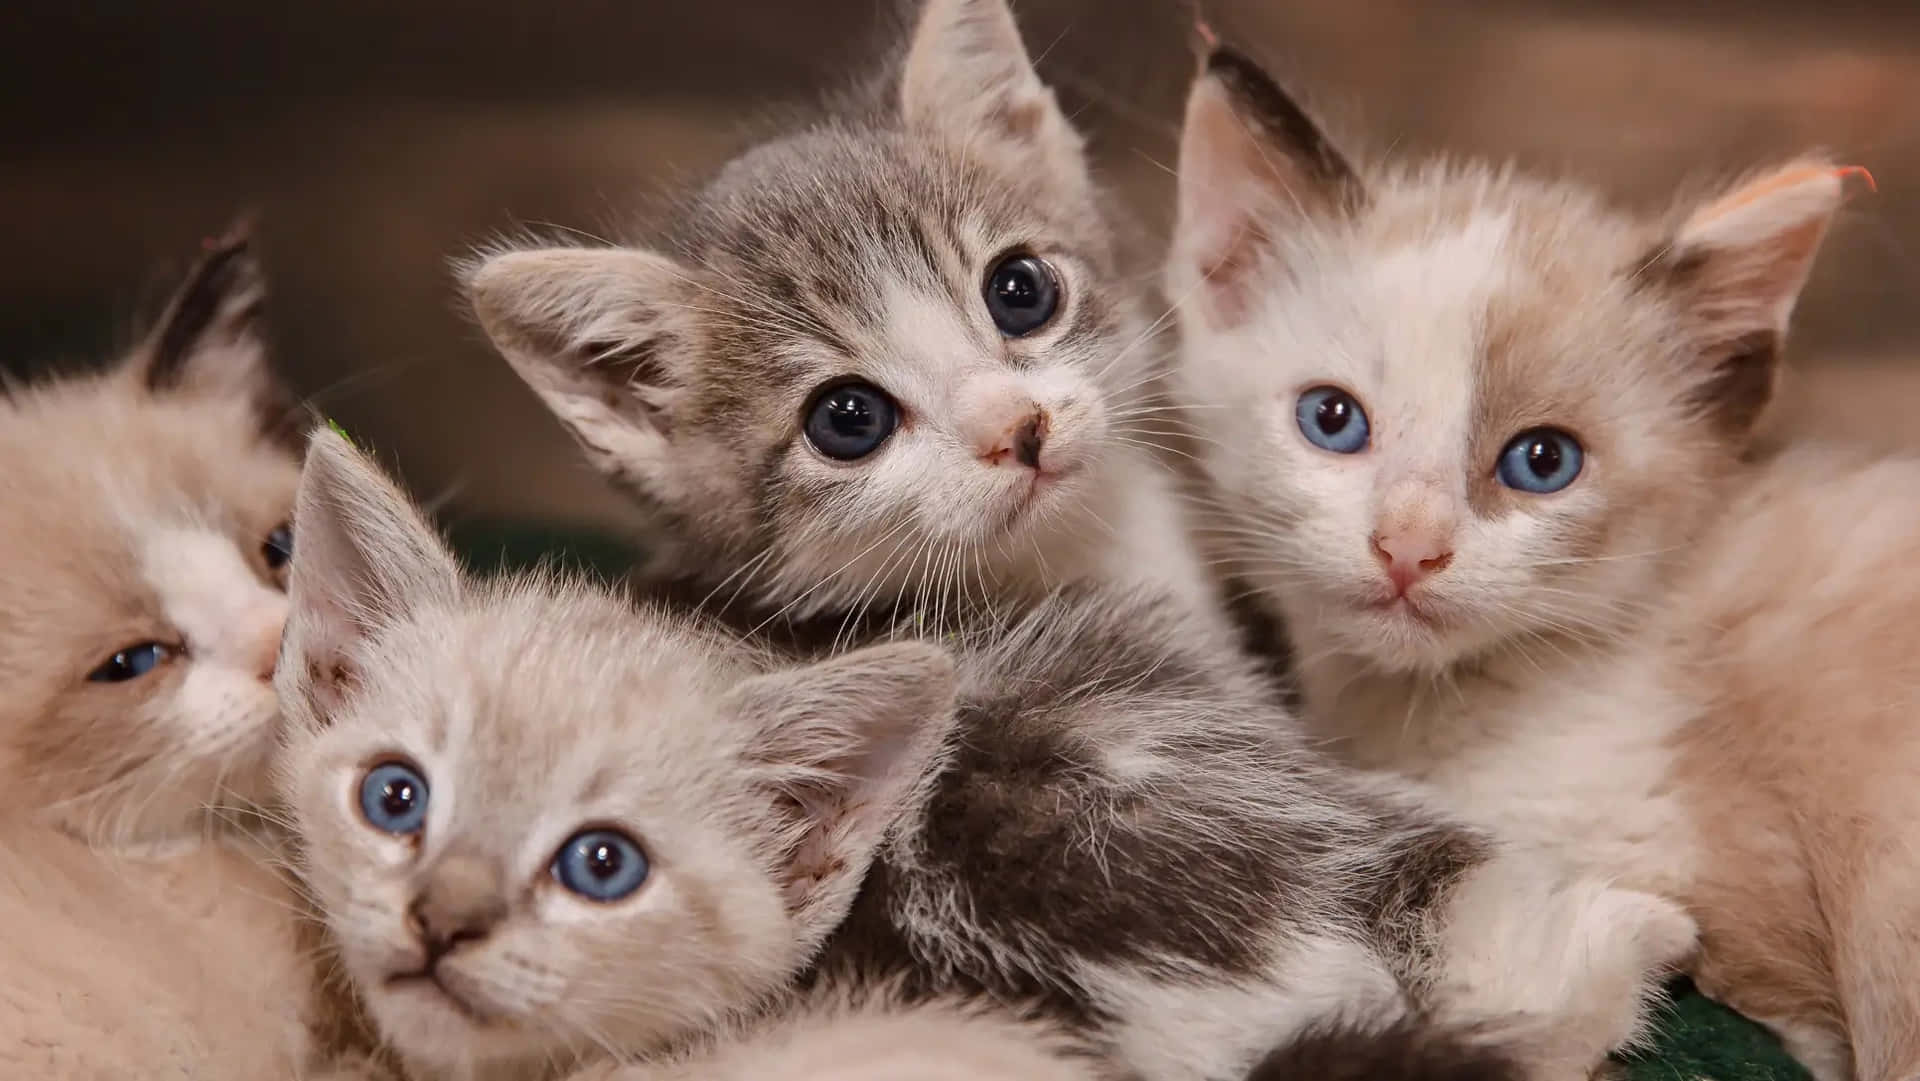 Cute Kittens Pictures Wallpaper